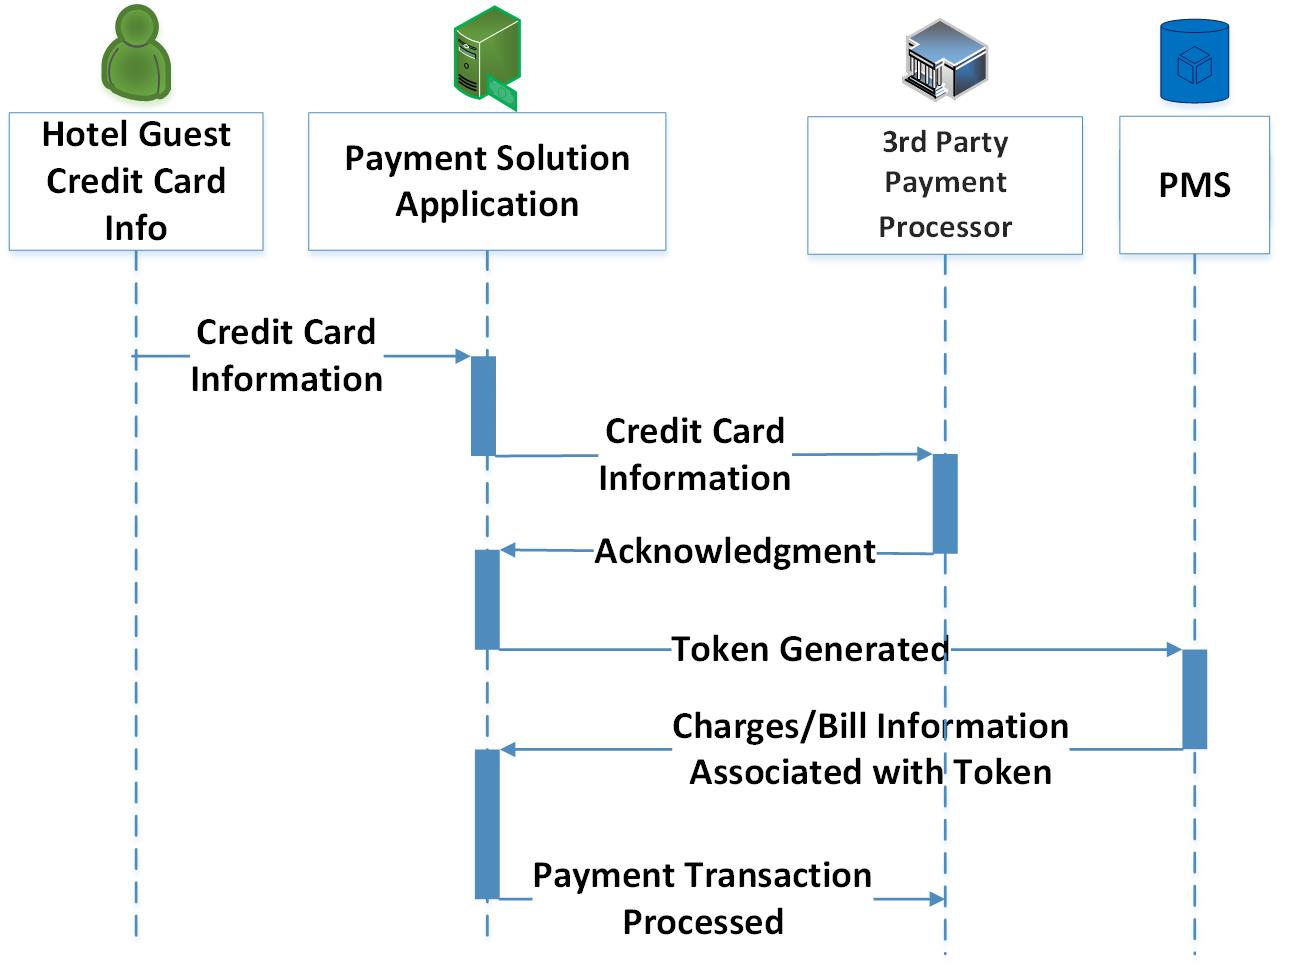 The process flow diagram for secure credit card transactions. This is a visual representation of the steps described in section 4.3.2.